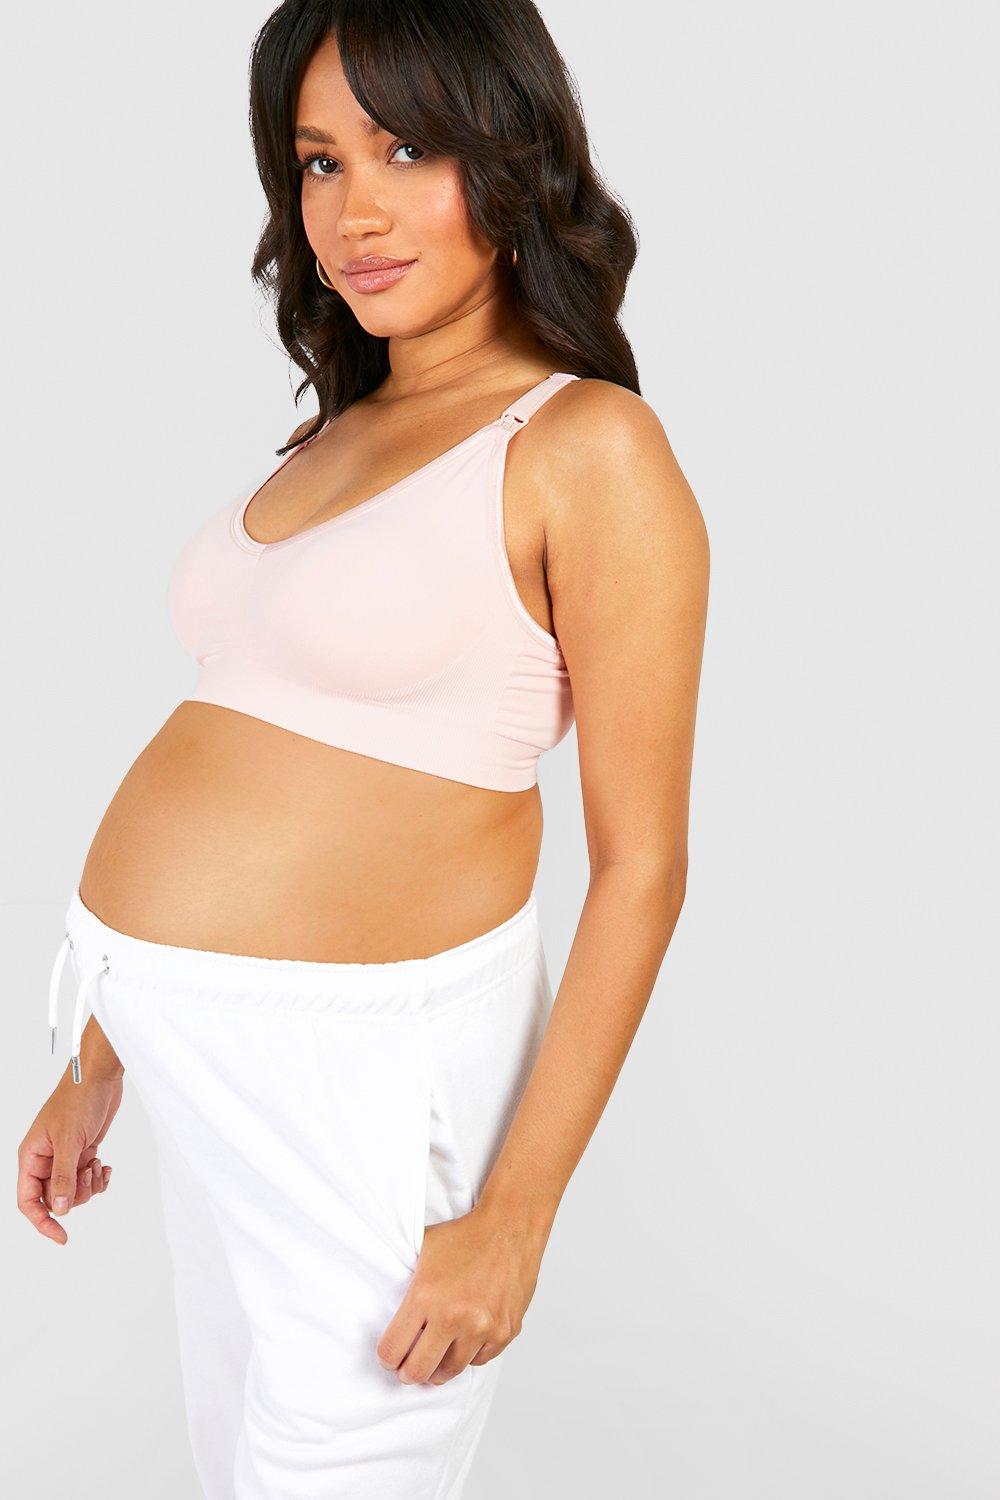 Seamless Maternity Seamless Crop Top With Padded Bra Fashionable And Sexy  Lingerie For Women 231102 From Zuo08, $30.19